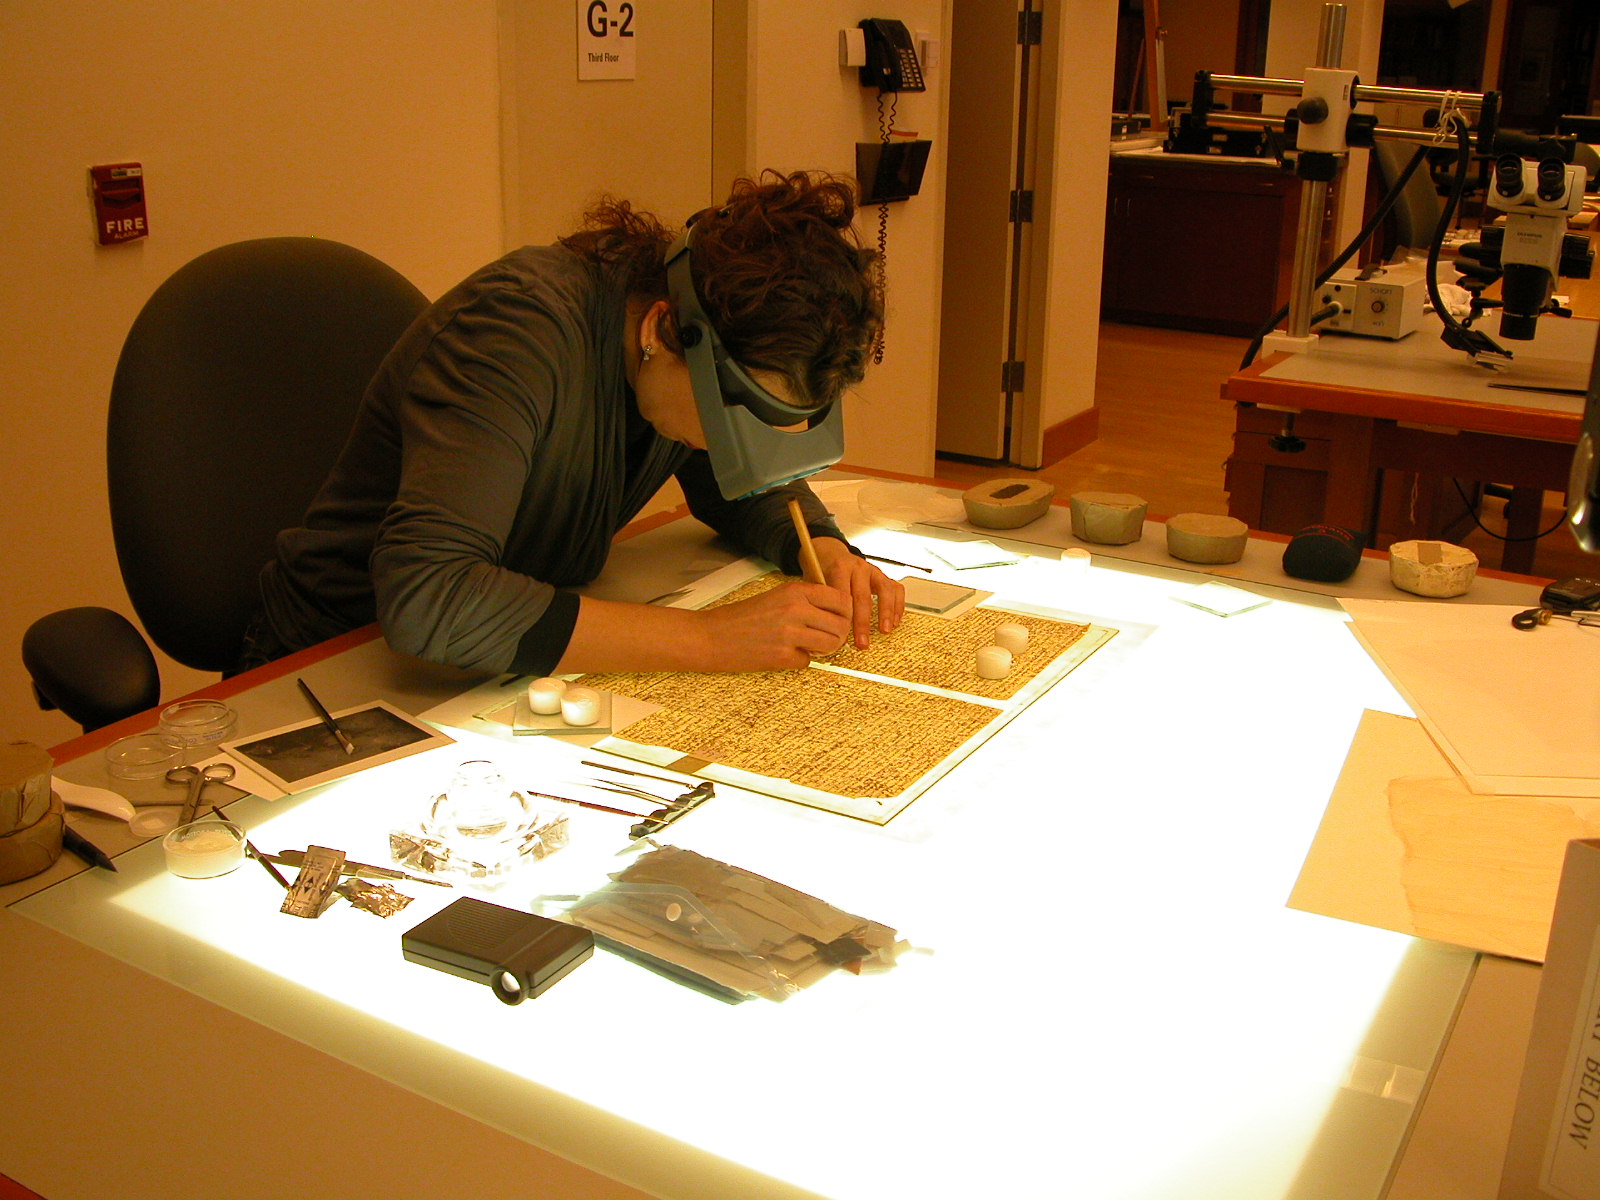 Yana Van Dyke prepares the letter for imaging. Copyright Adrian S. Wisnicki. Creative Commons Attribution-NonCommercial 3.0 Unported (https://creativecommons.org/licenses/by-nc/3.0/).